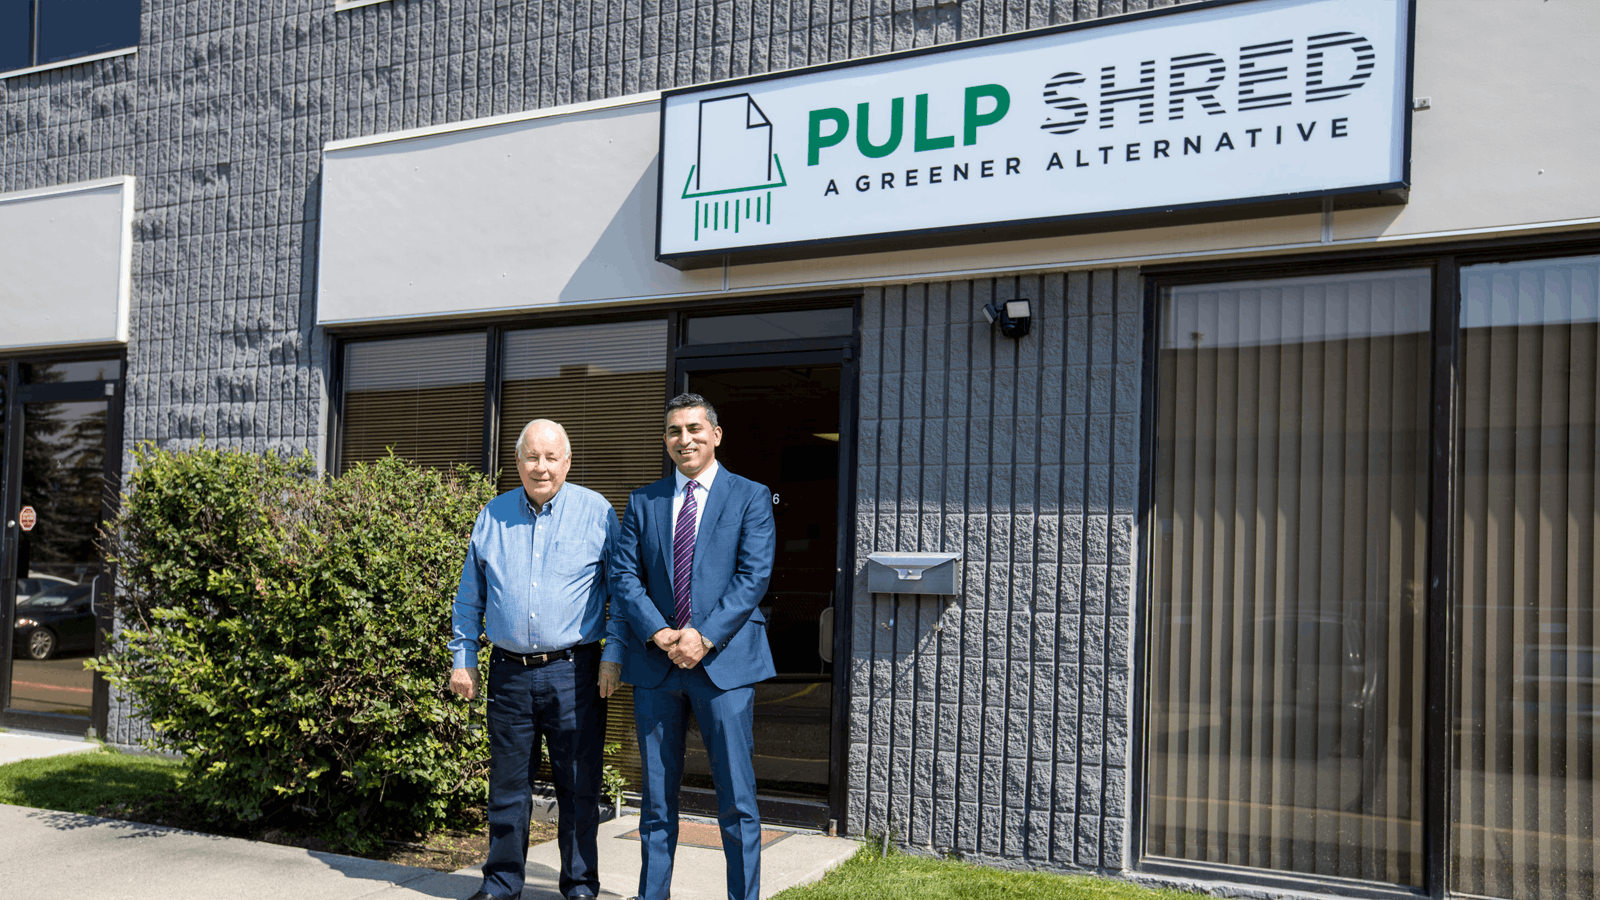 Pulp Shred co-founders Ankur Mahajan and Ken Waddell in front of their office